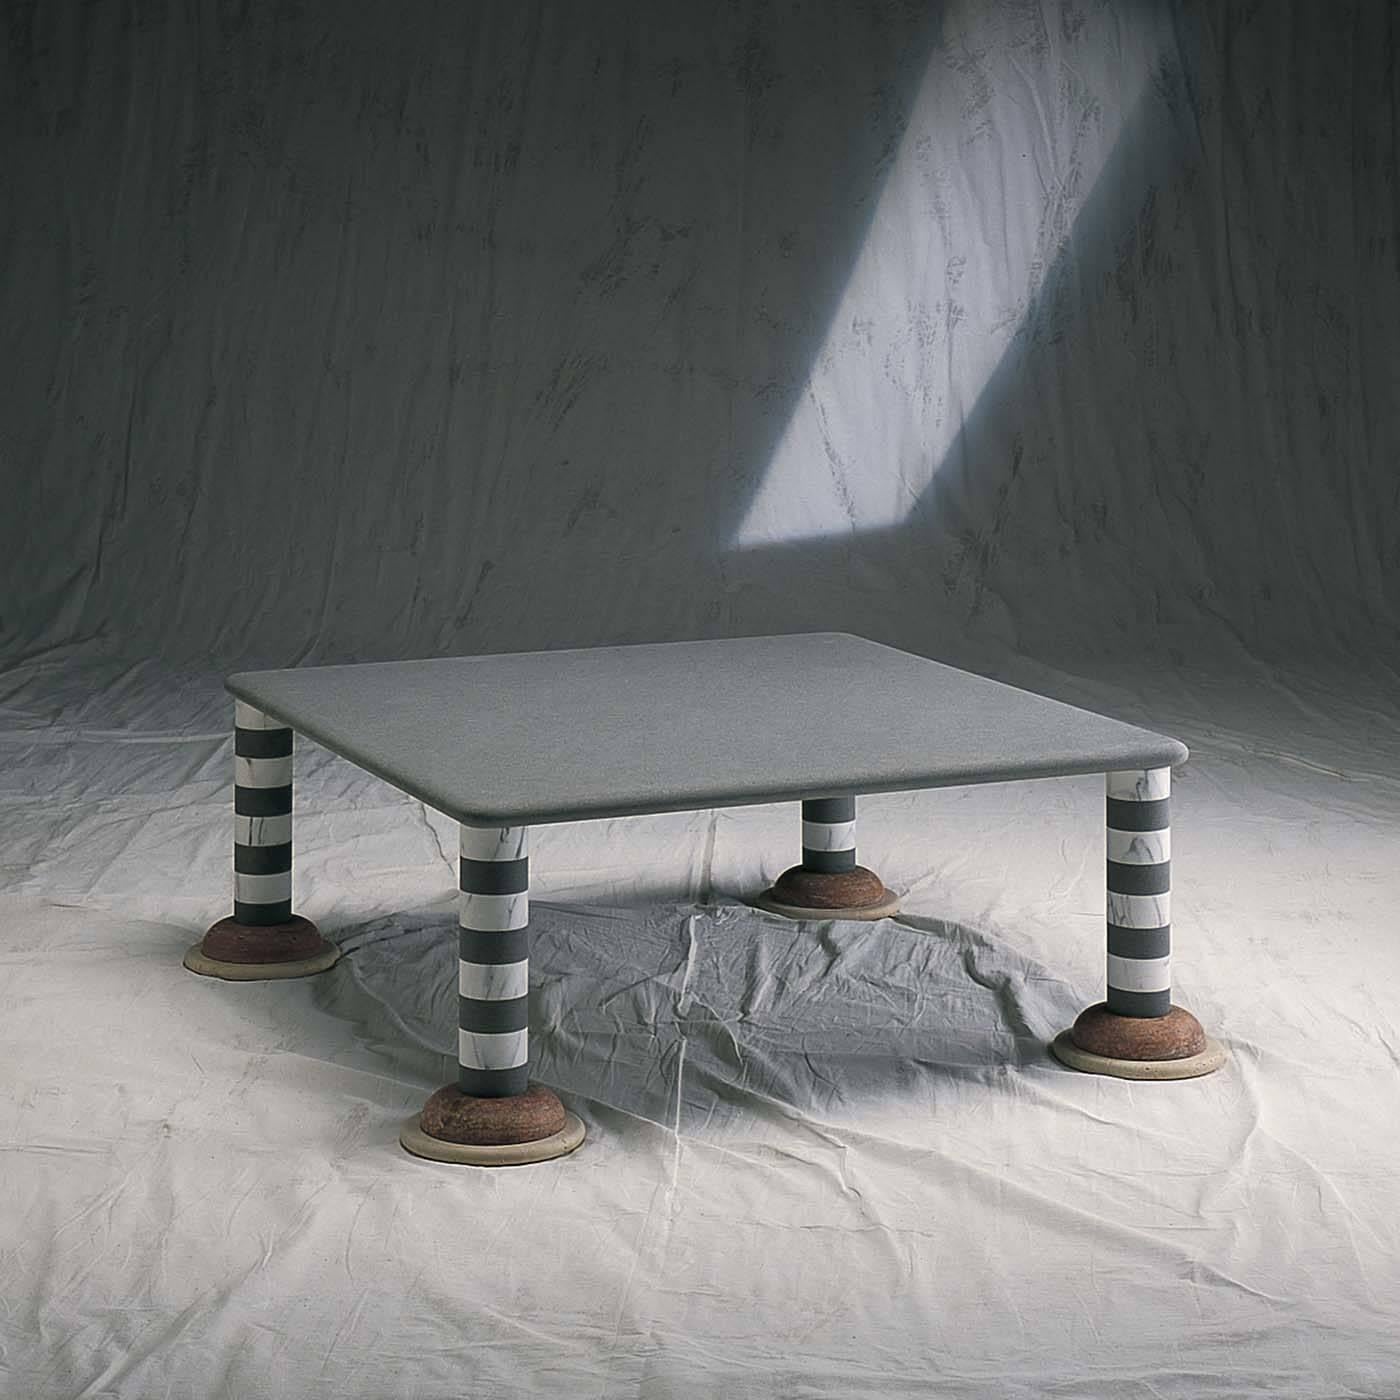 A striking, original design by Michele De Lucchi featuring a square top in pietra serena (gray sandstone) with rounded edges supported by four cylindrical legs in a striped pattern of white Carrara marble and gray sandstone. The visually striking